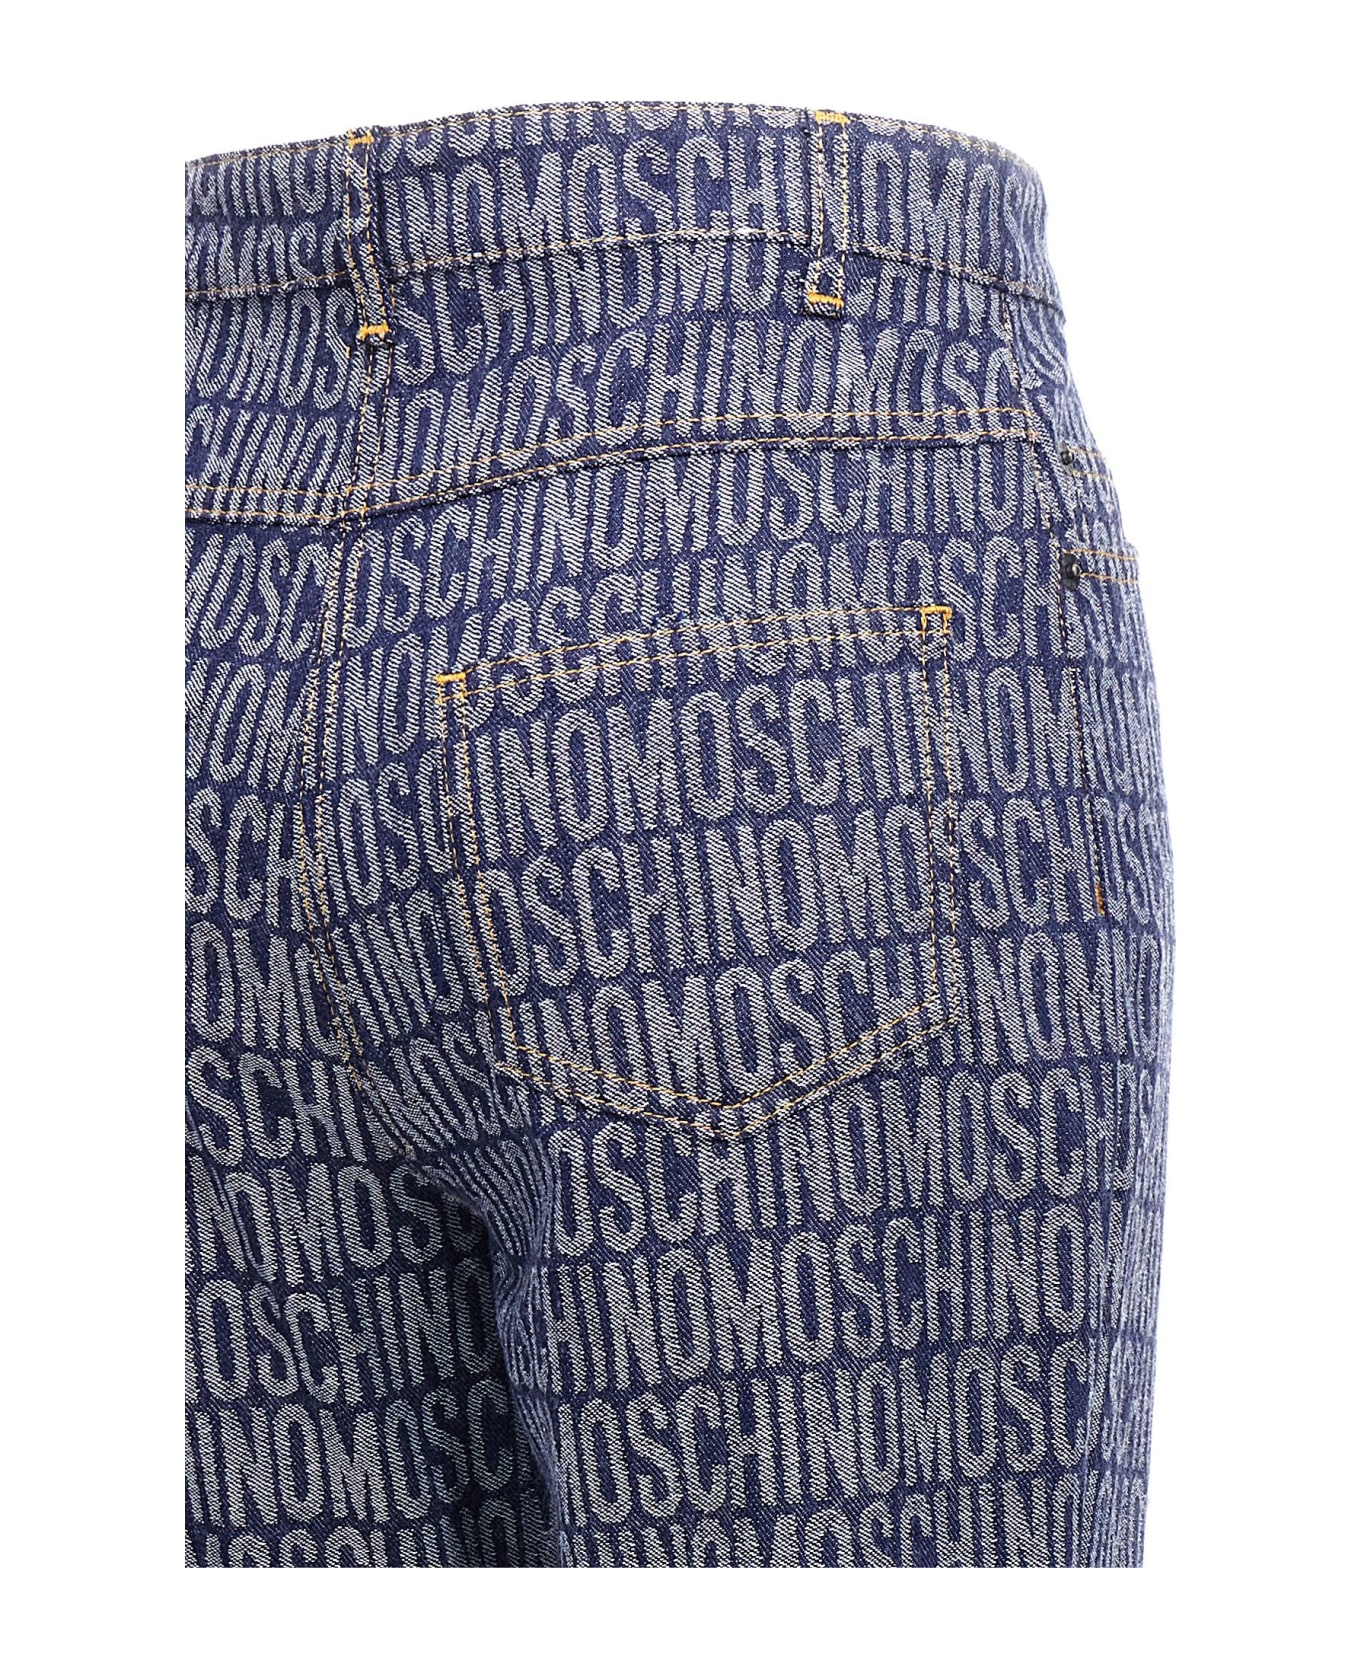 Moschino 'logo' Jeans - Blue ボトムス